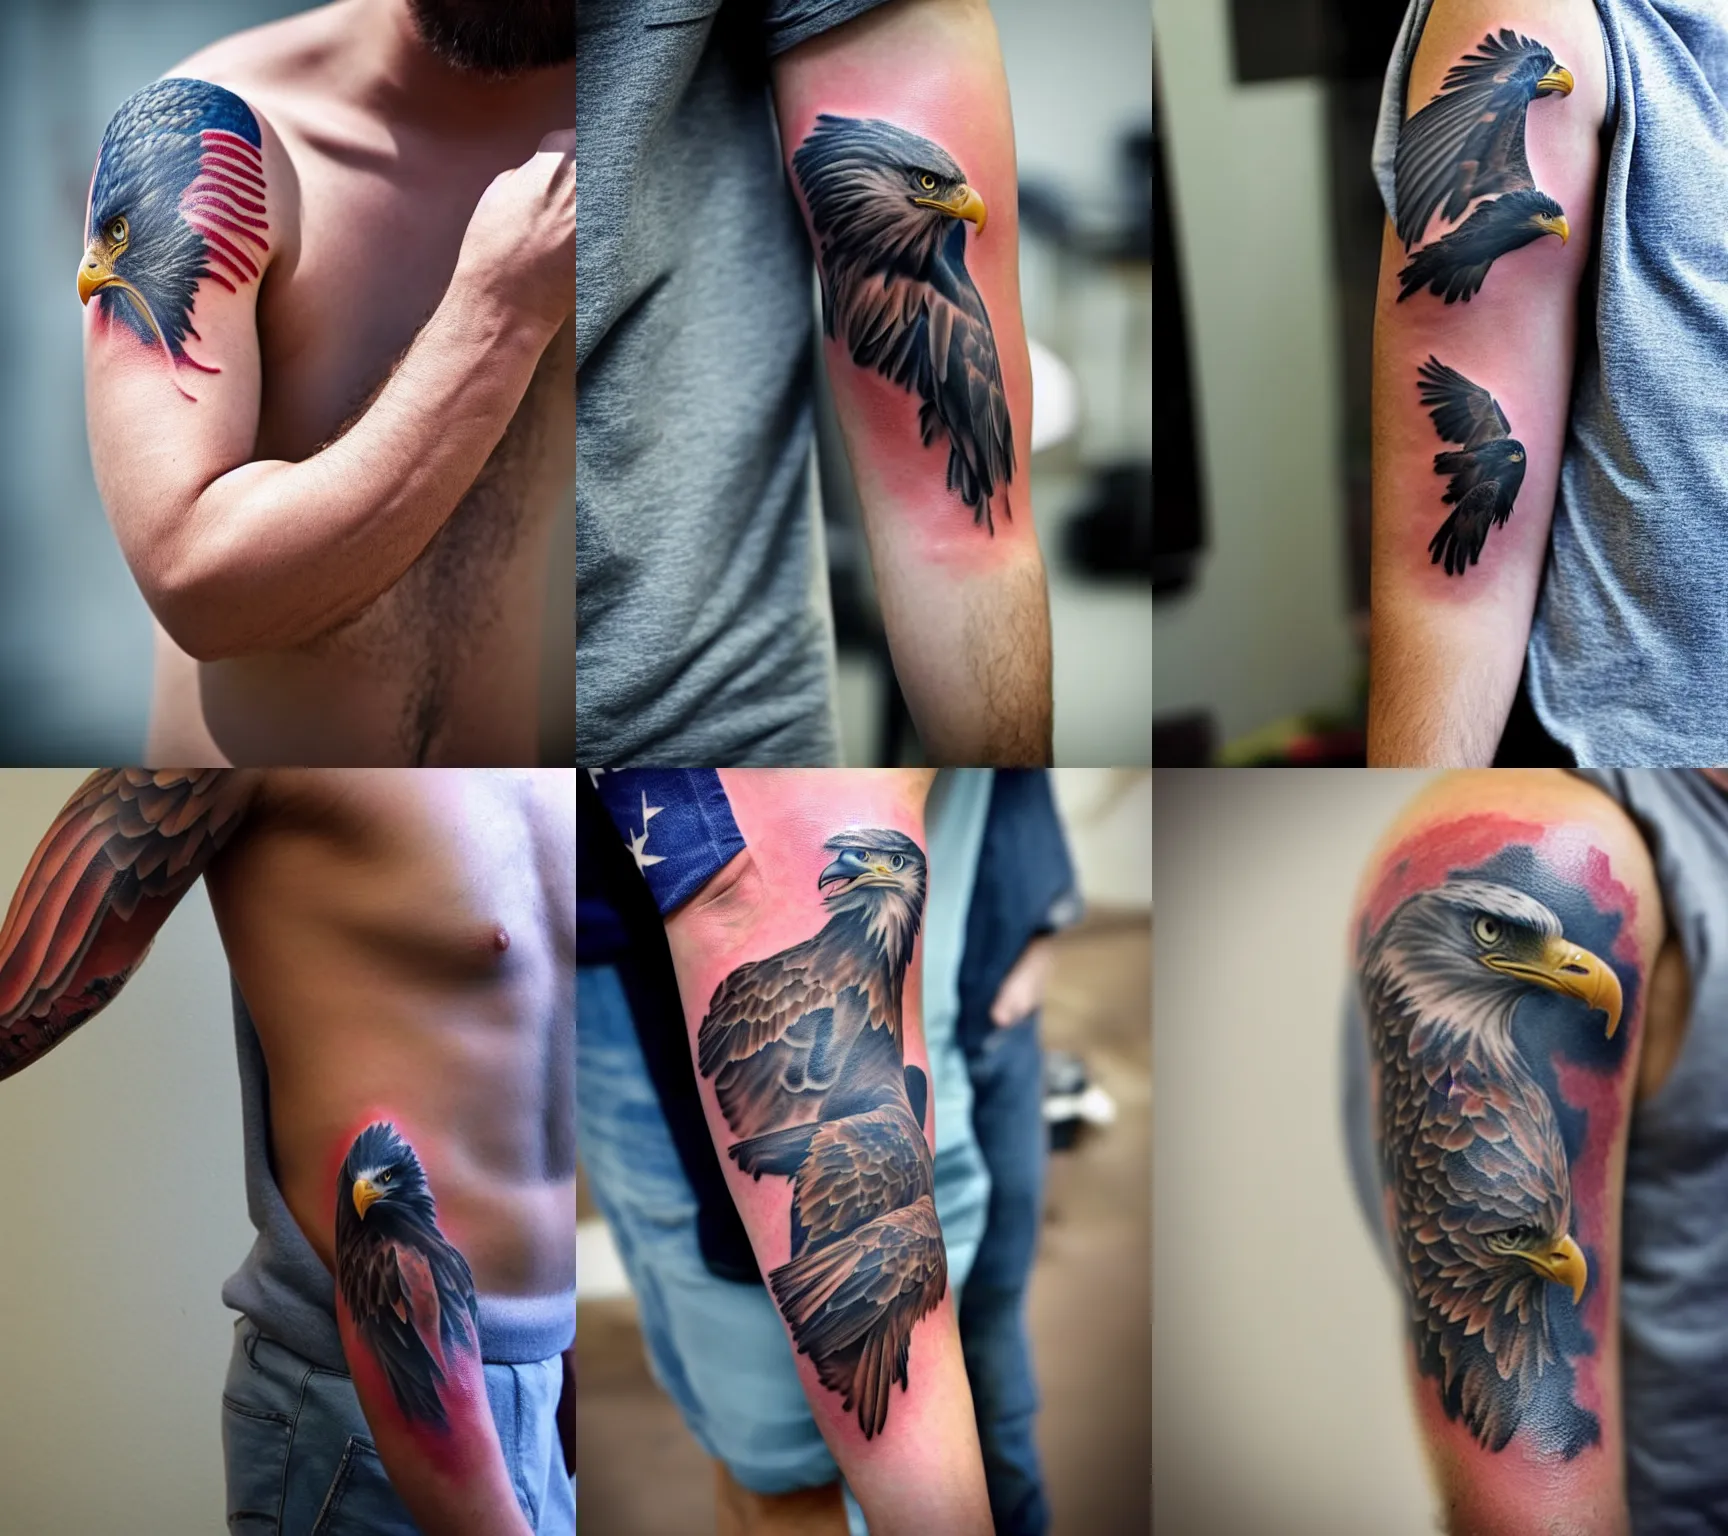 Micro-realistic eagle tattoo on the inner arm.